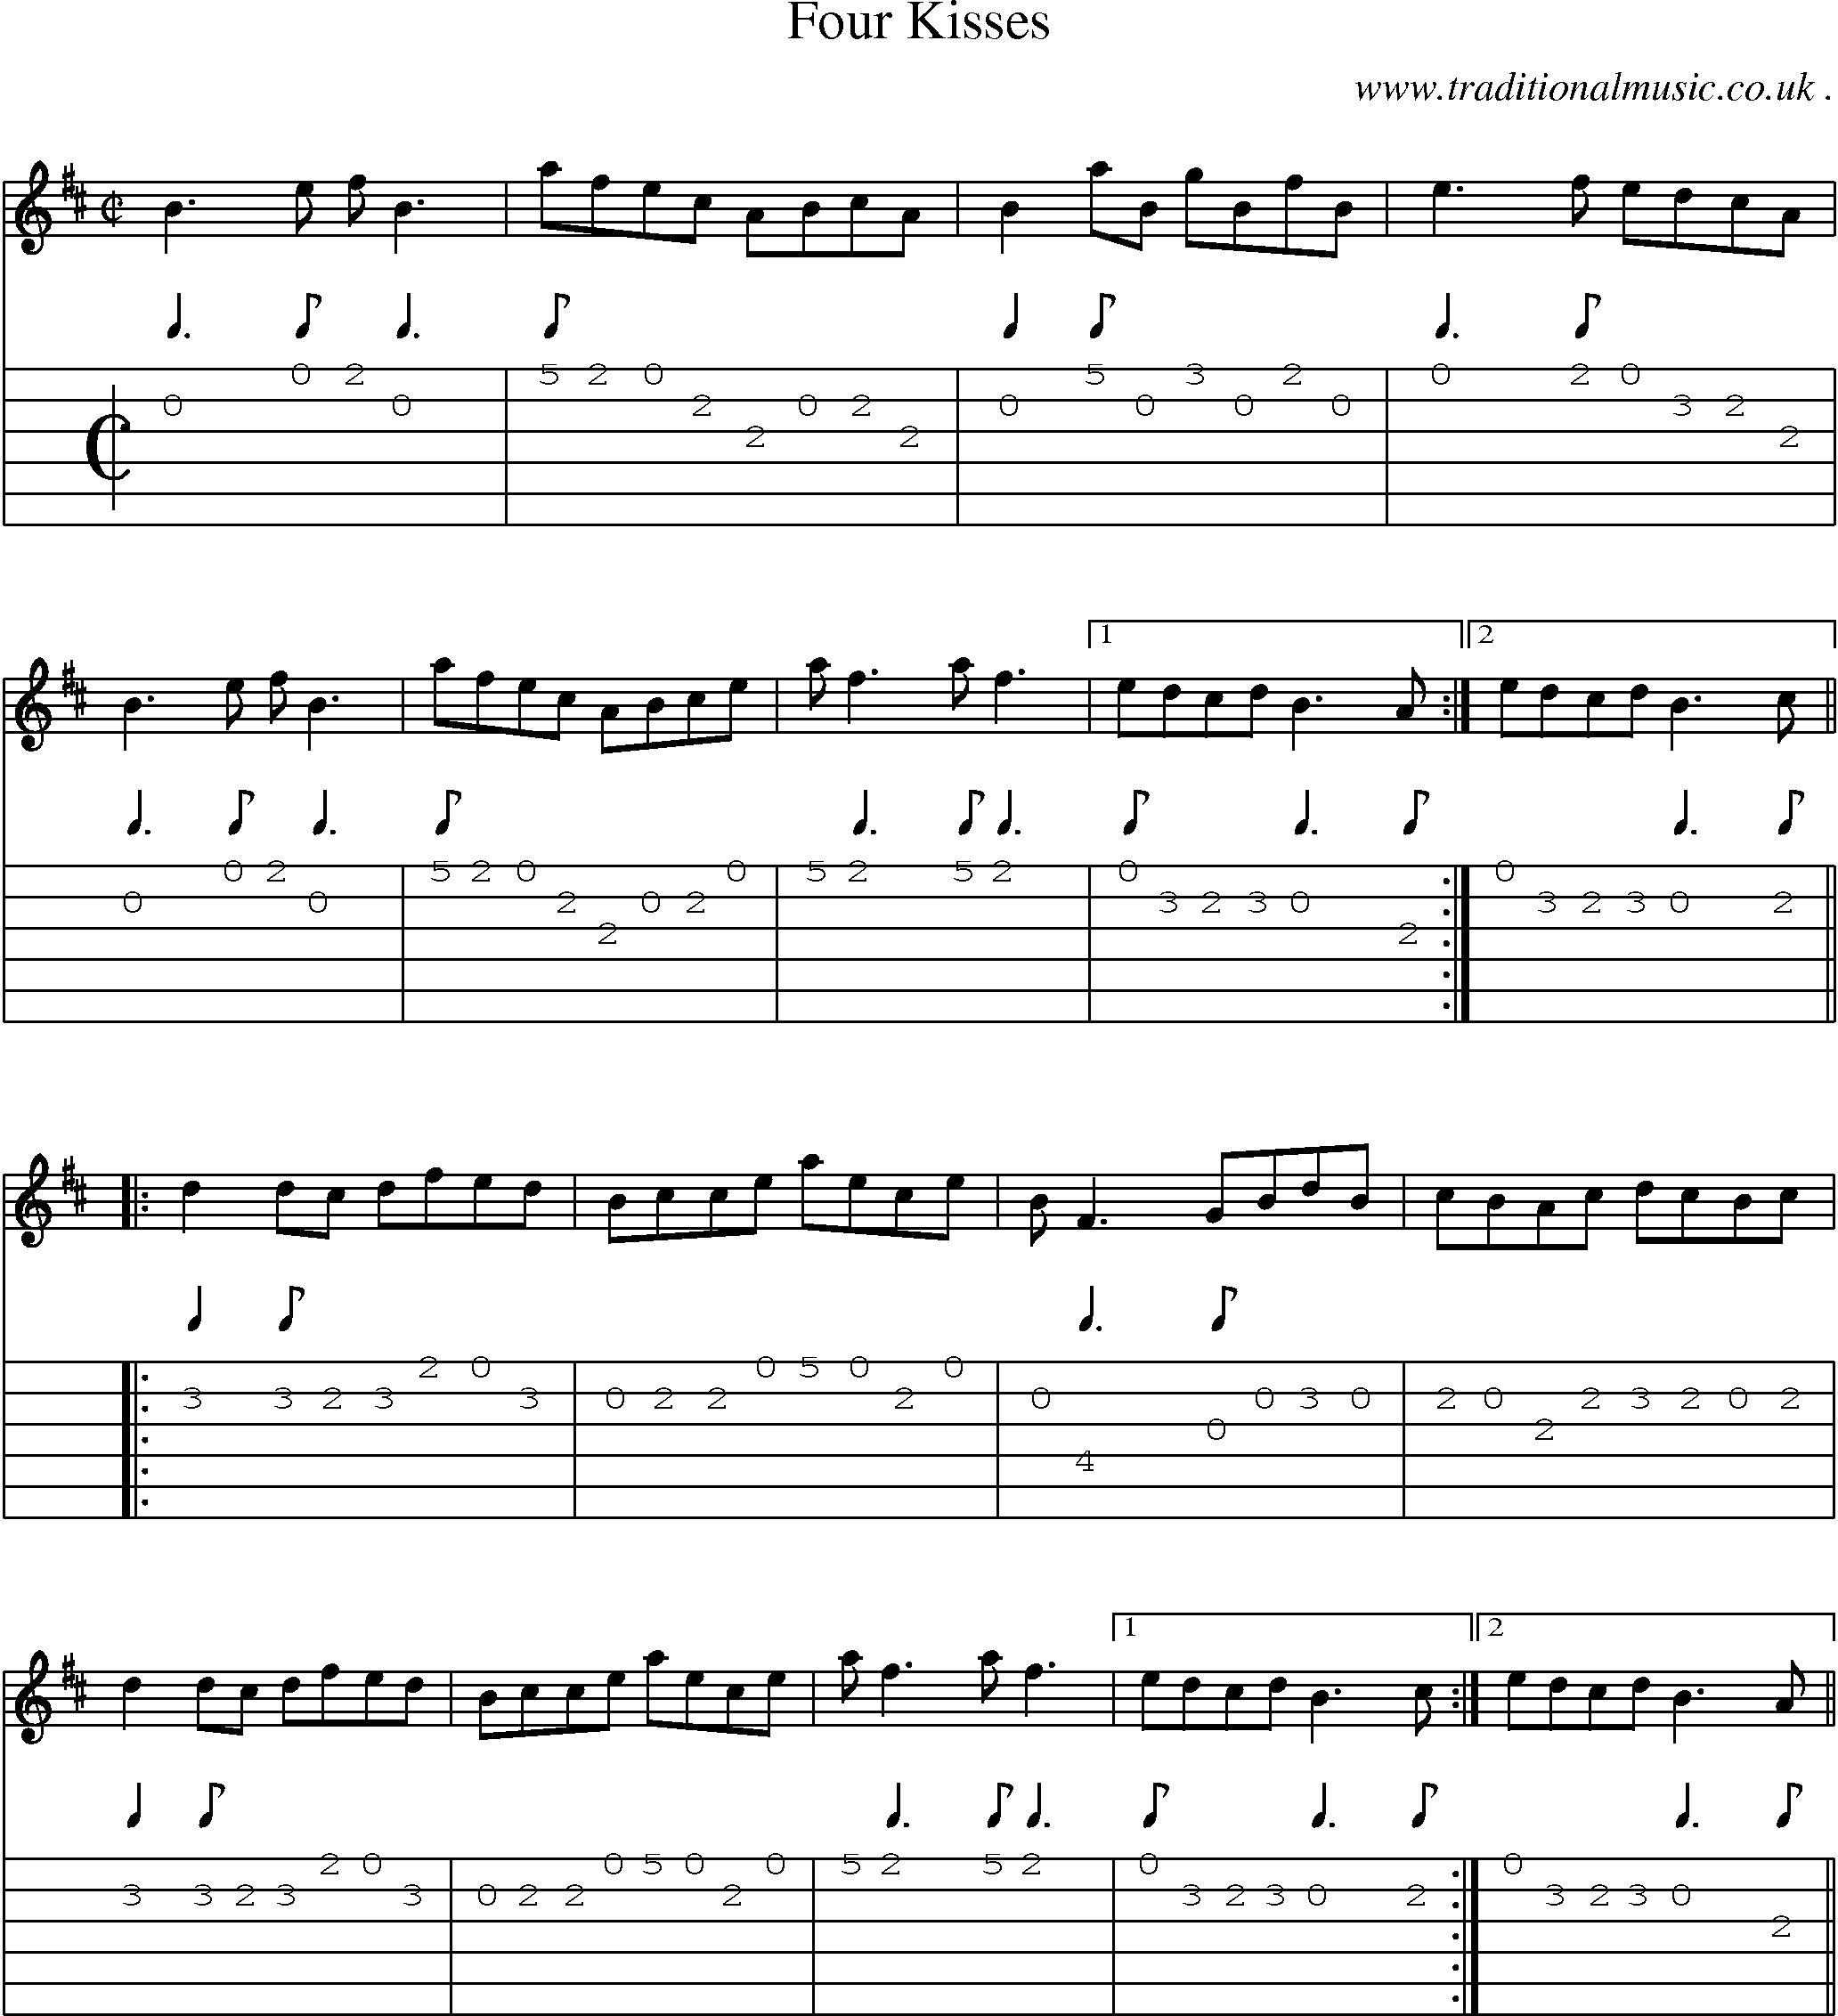 Sheet-Music and Guitar Tabs for Four Kisses